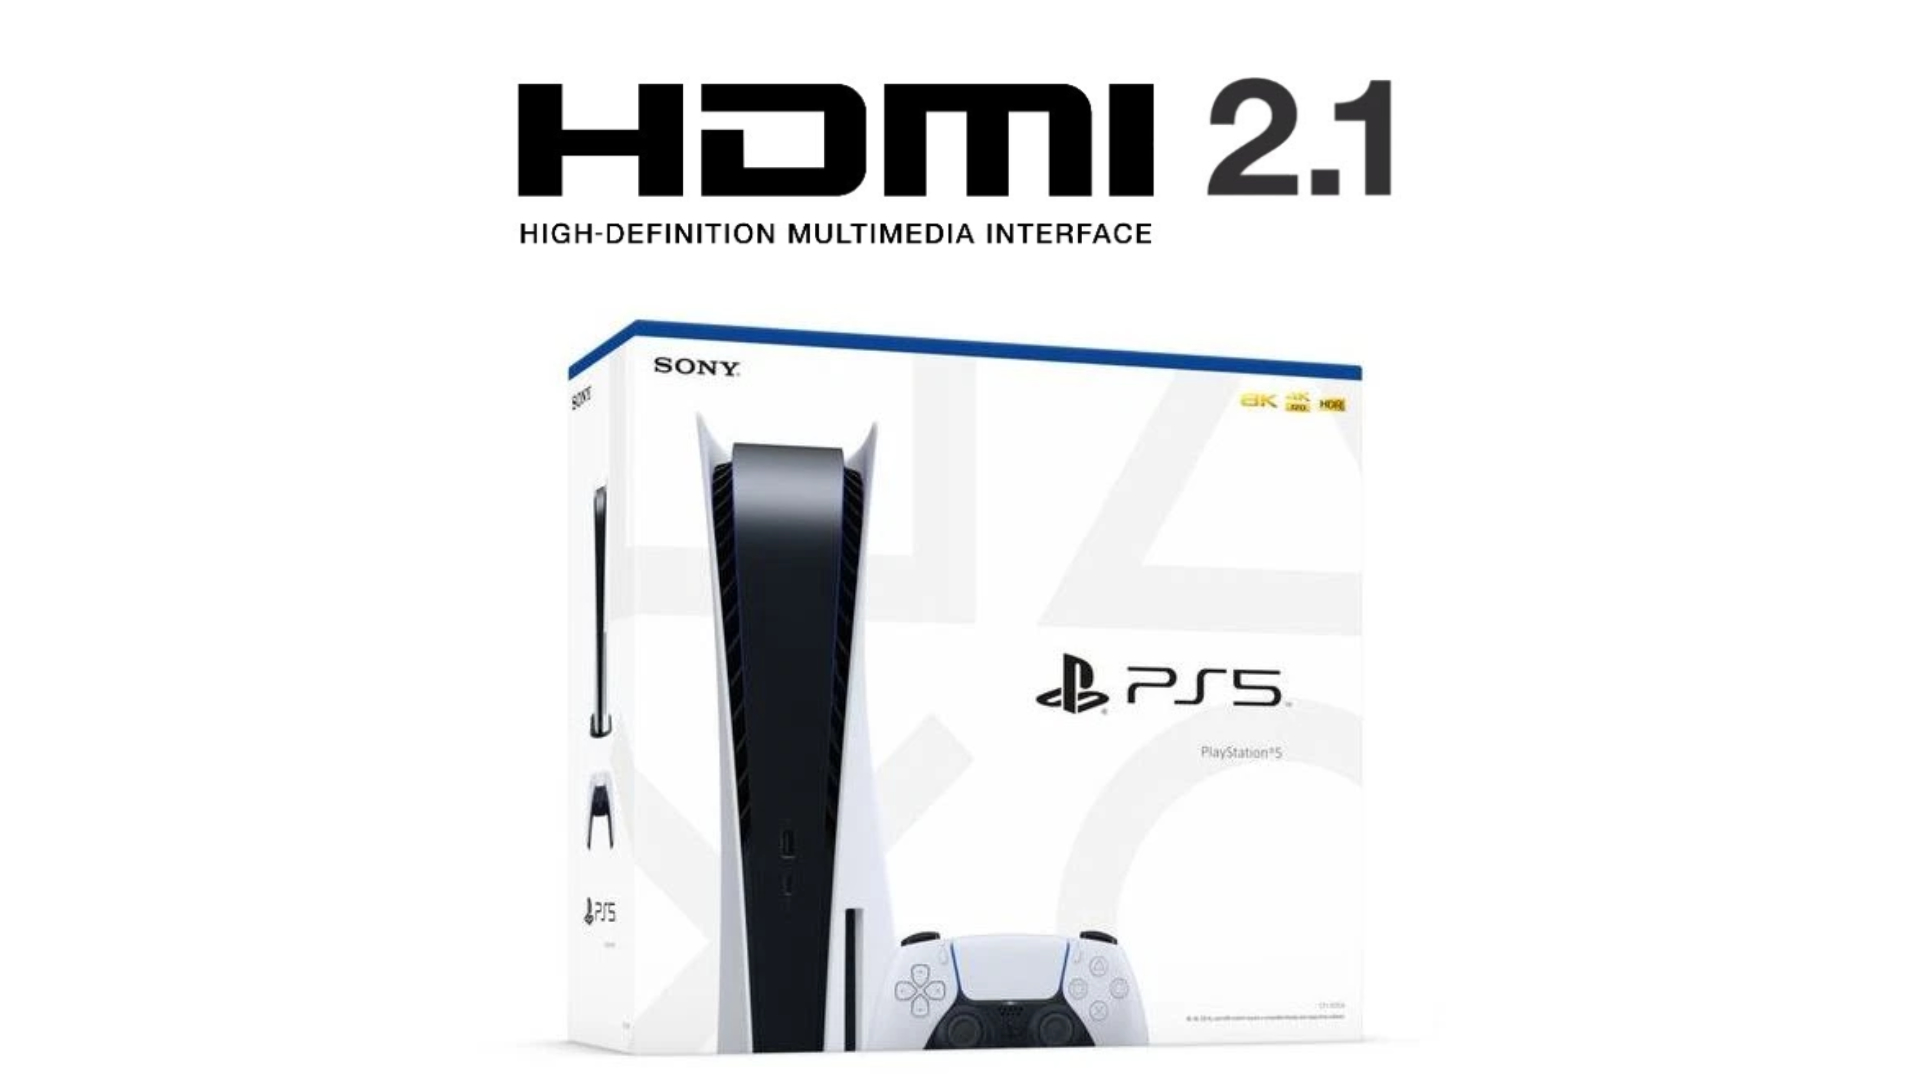 Ultra High Speed HDMI Cable for PlayStation 5